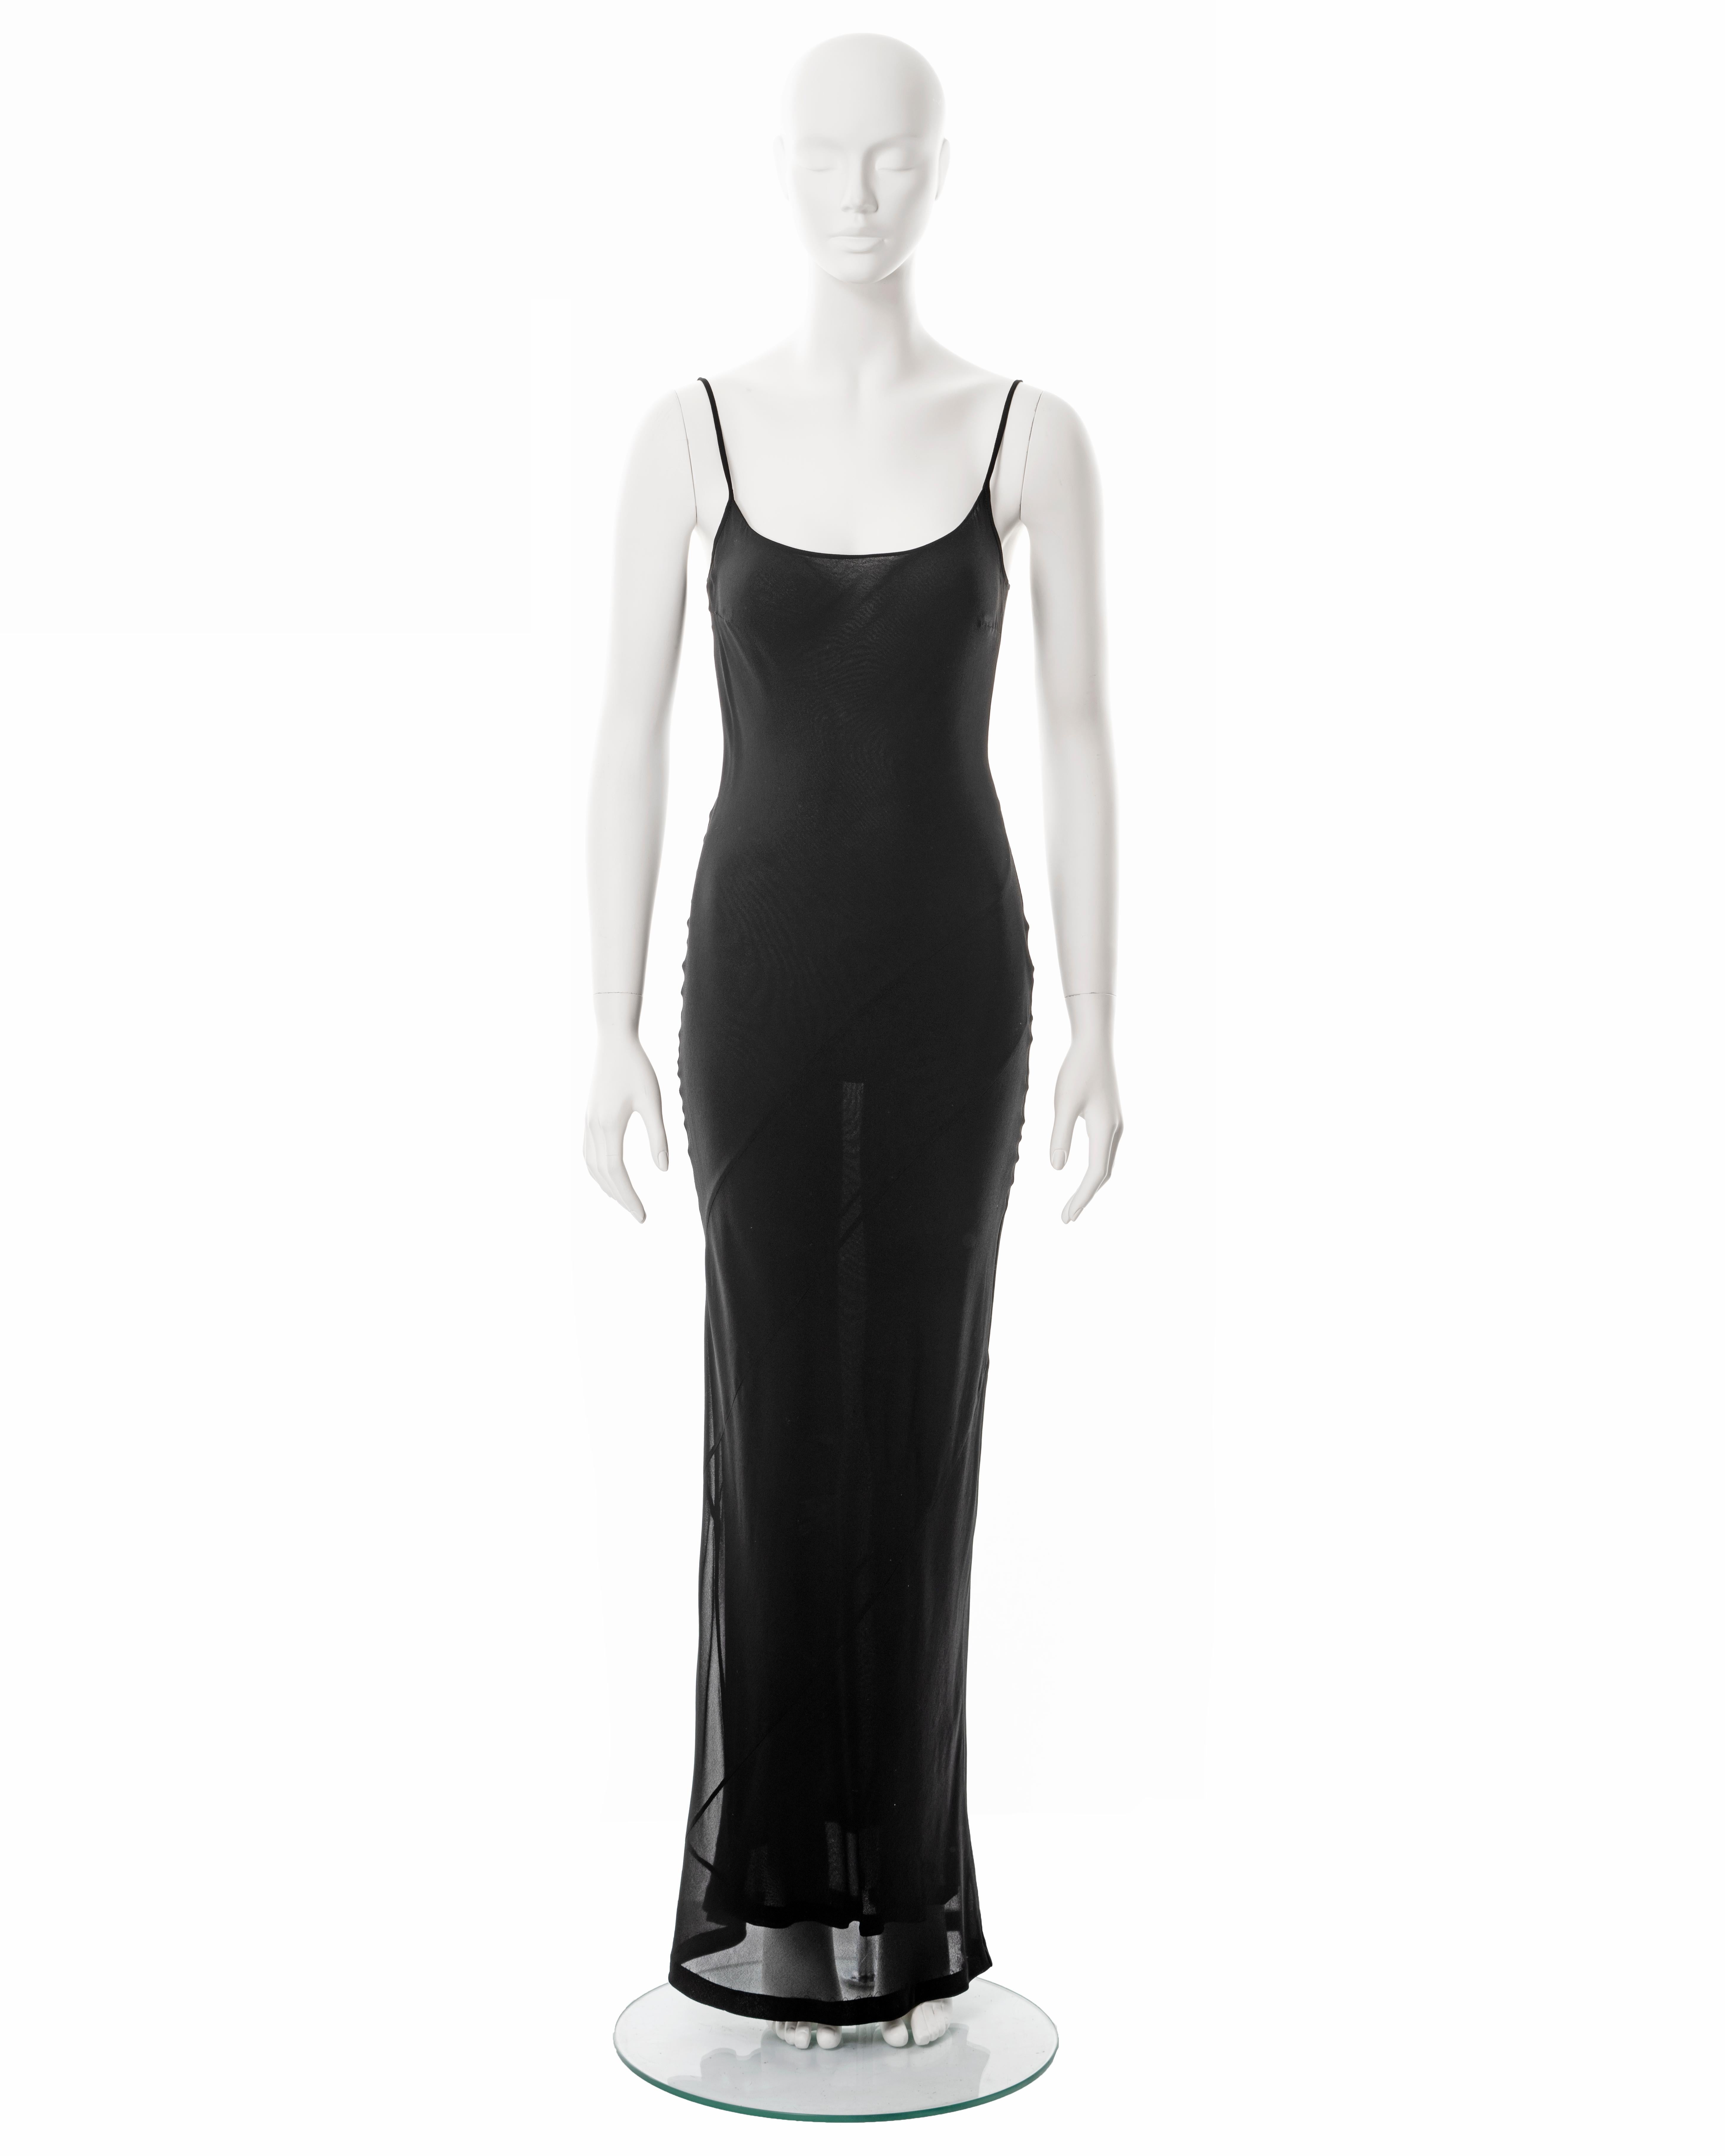 ▪ Gucci black evening slip dress
▪ Designed by Tom Ford
▪ Sold by One of a Kind Archive
▪ Spring-Summer 1997
▪ Constructed from black bias-cut silk-rayon blend crepe chiffon
▪ Double-layered
▪ Scoop neck
▪ Spaghetti straps 
▪ Floor length skirt 
▪